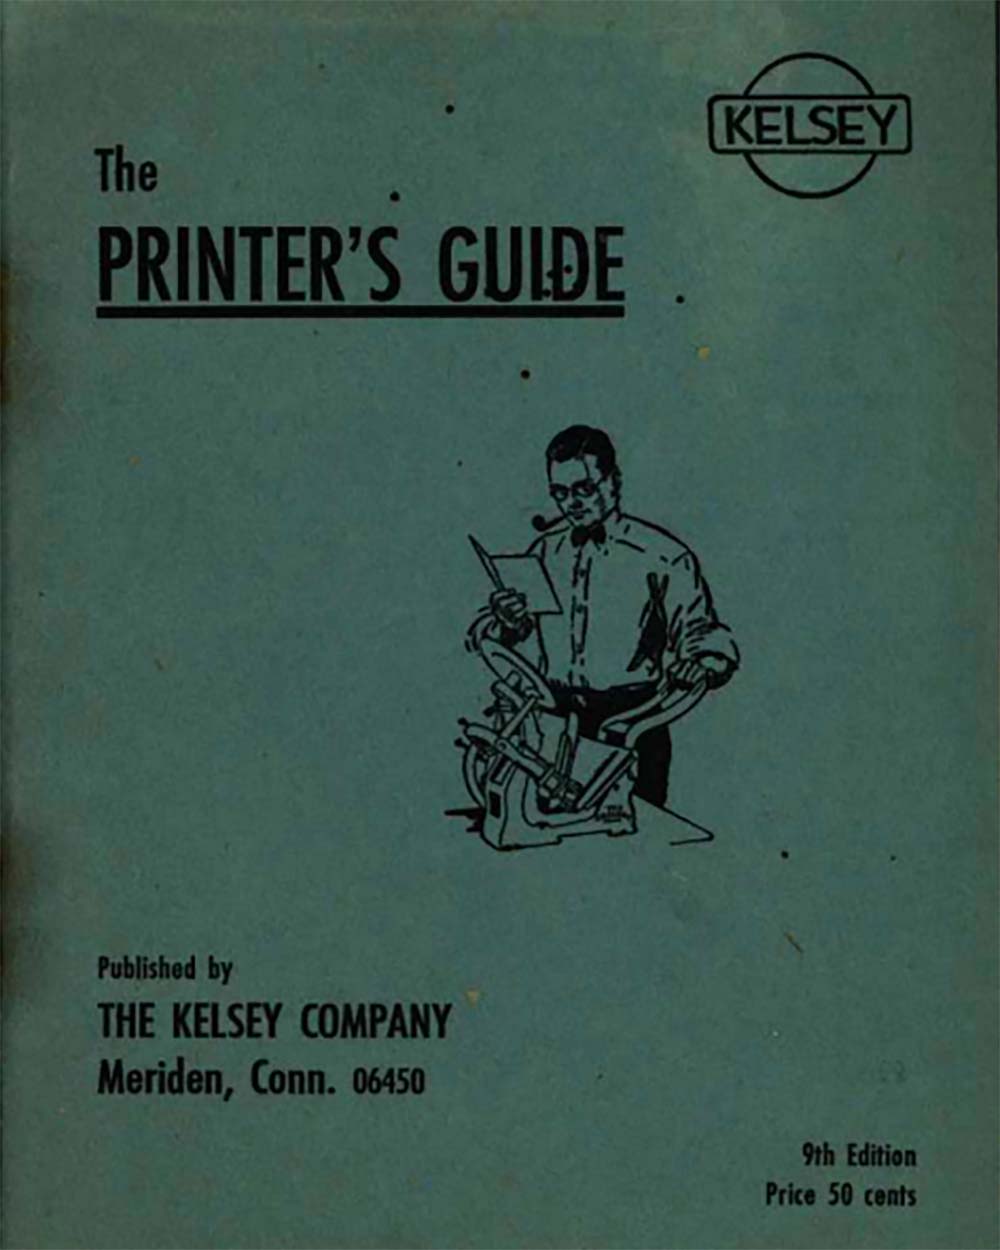 The Kelsey Company, "The Printer's Guide" (ca. 1940s-50s)